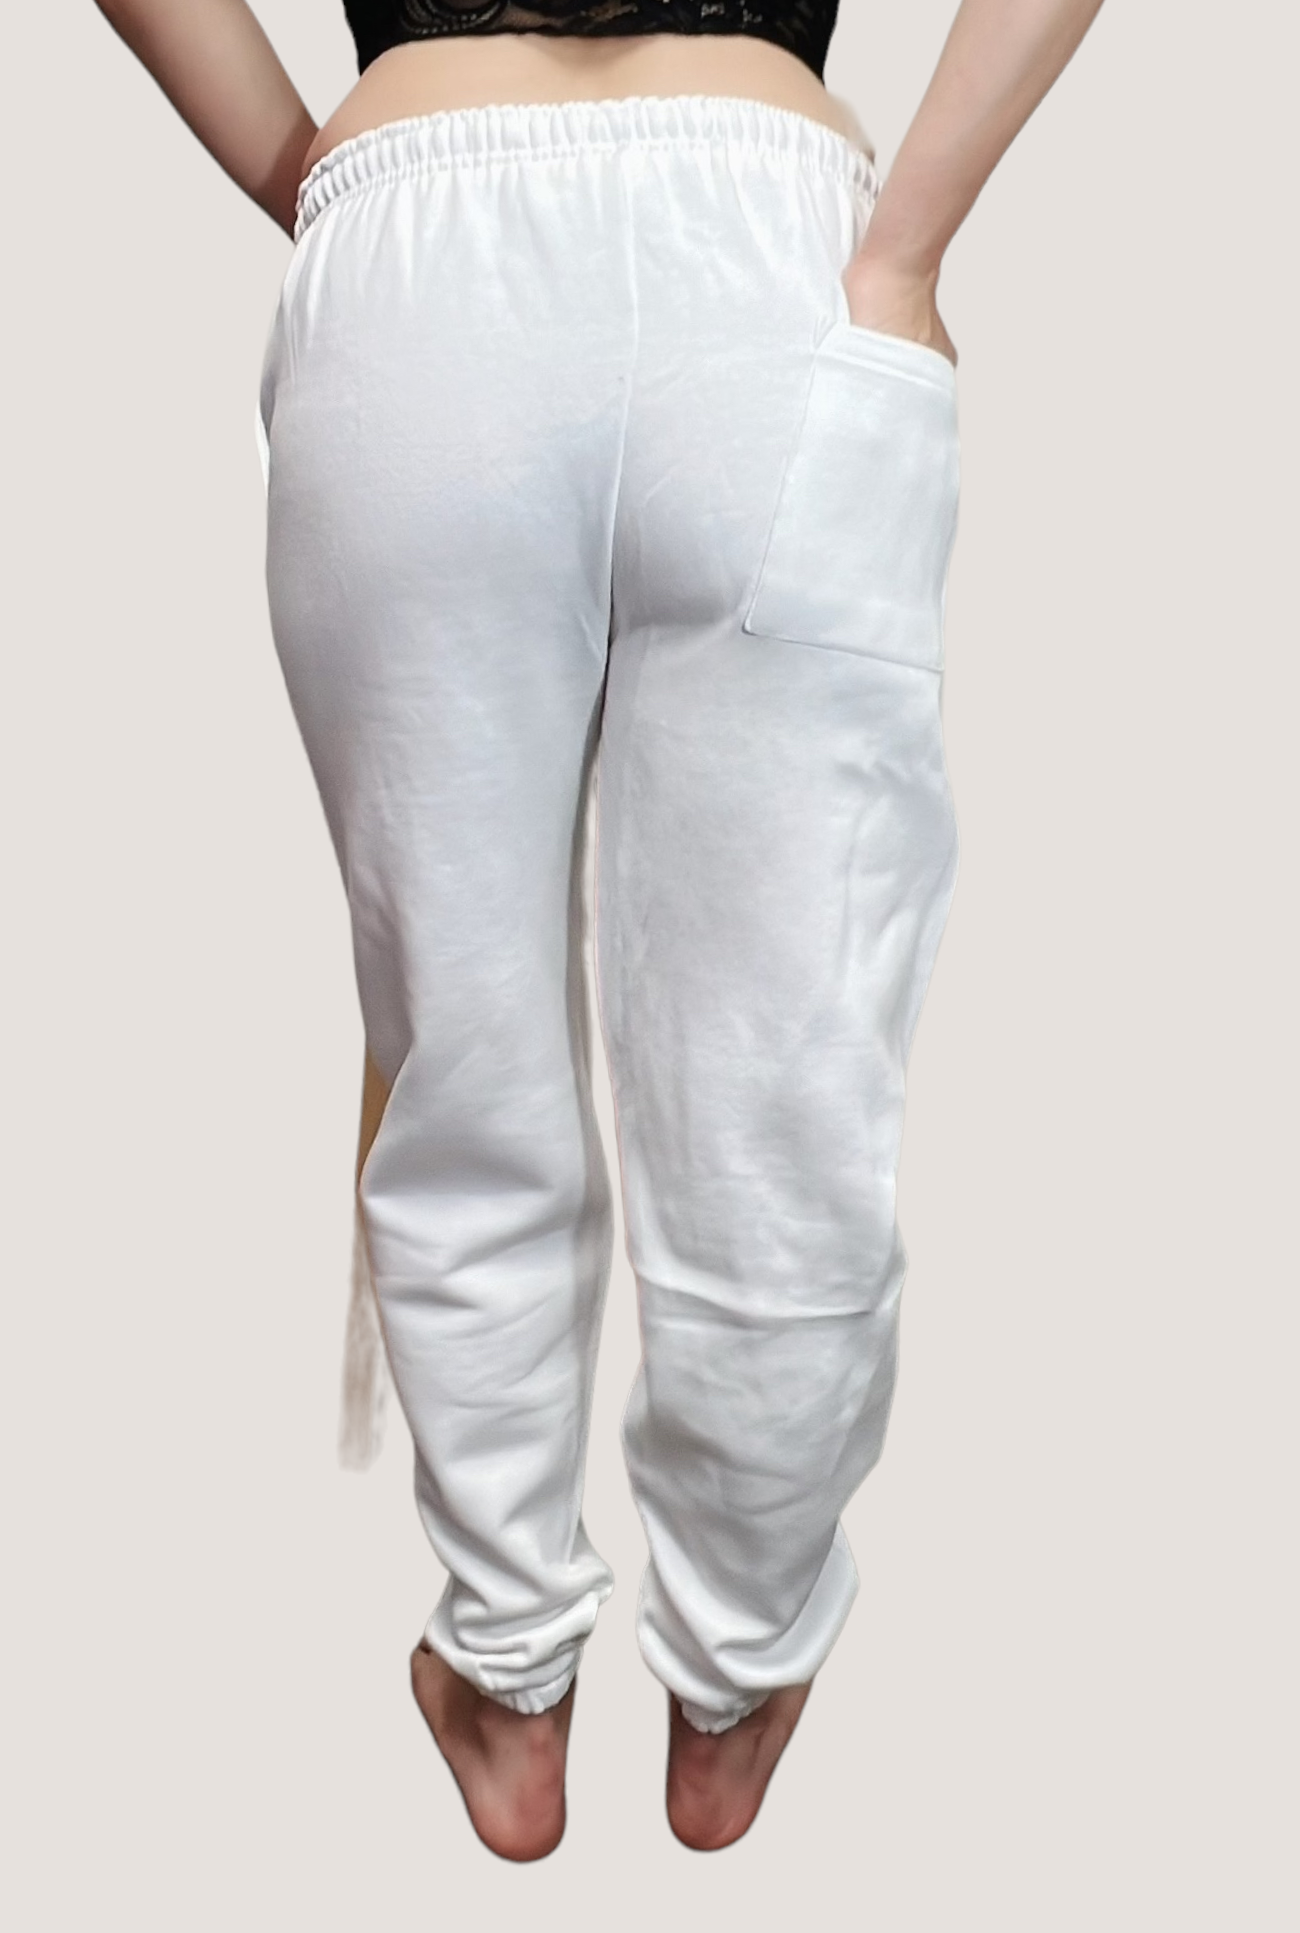 Trashy Cowgirl COUNTRY PINUP Sweat PANTS